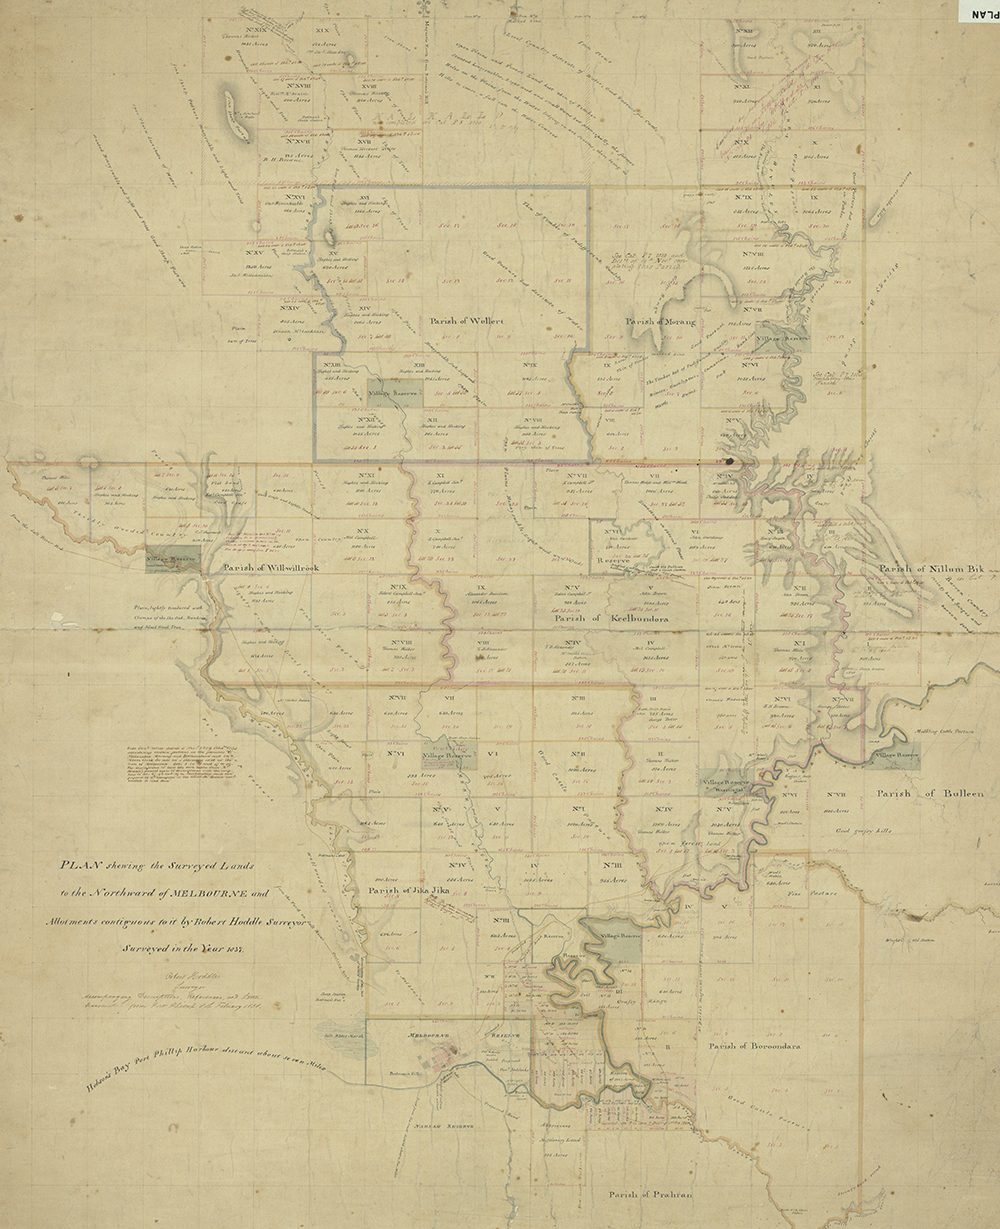 Lightly coloured map on sepia paper. very few details are apparent, but it reads in the lower left corner "Plan shewing the surveyed lands to the northward of Melbourne and allotments contiguous to it by Robert Hoddle surveyor. Surveyed in the year 1837" 